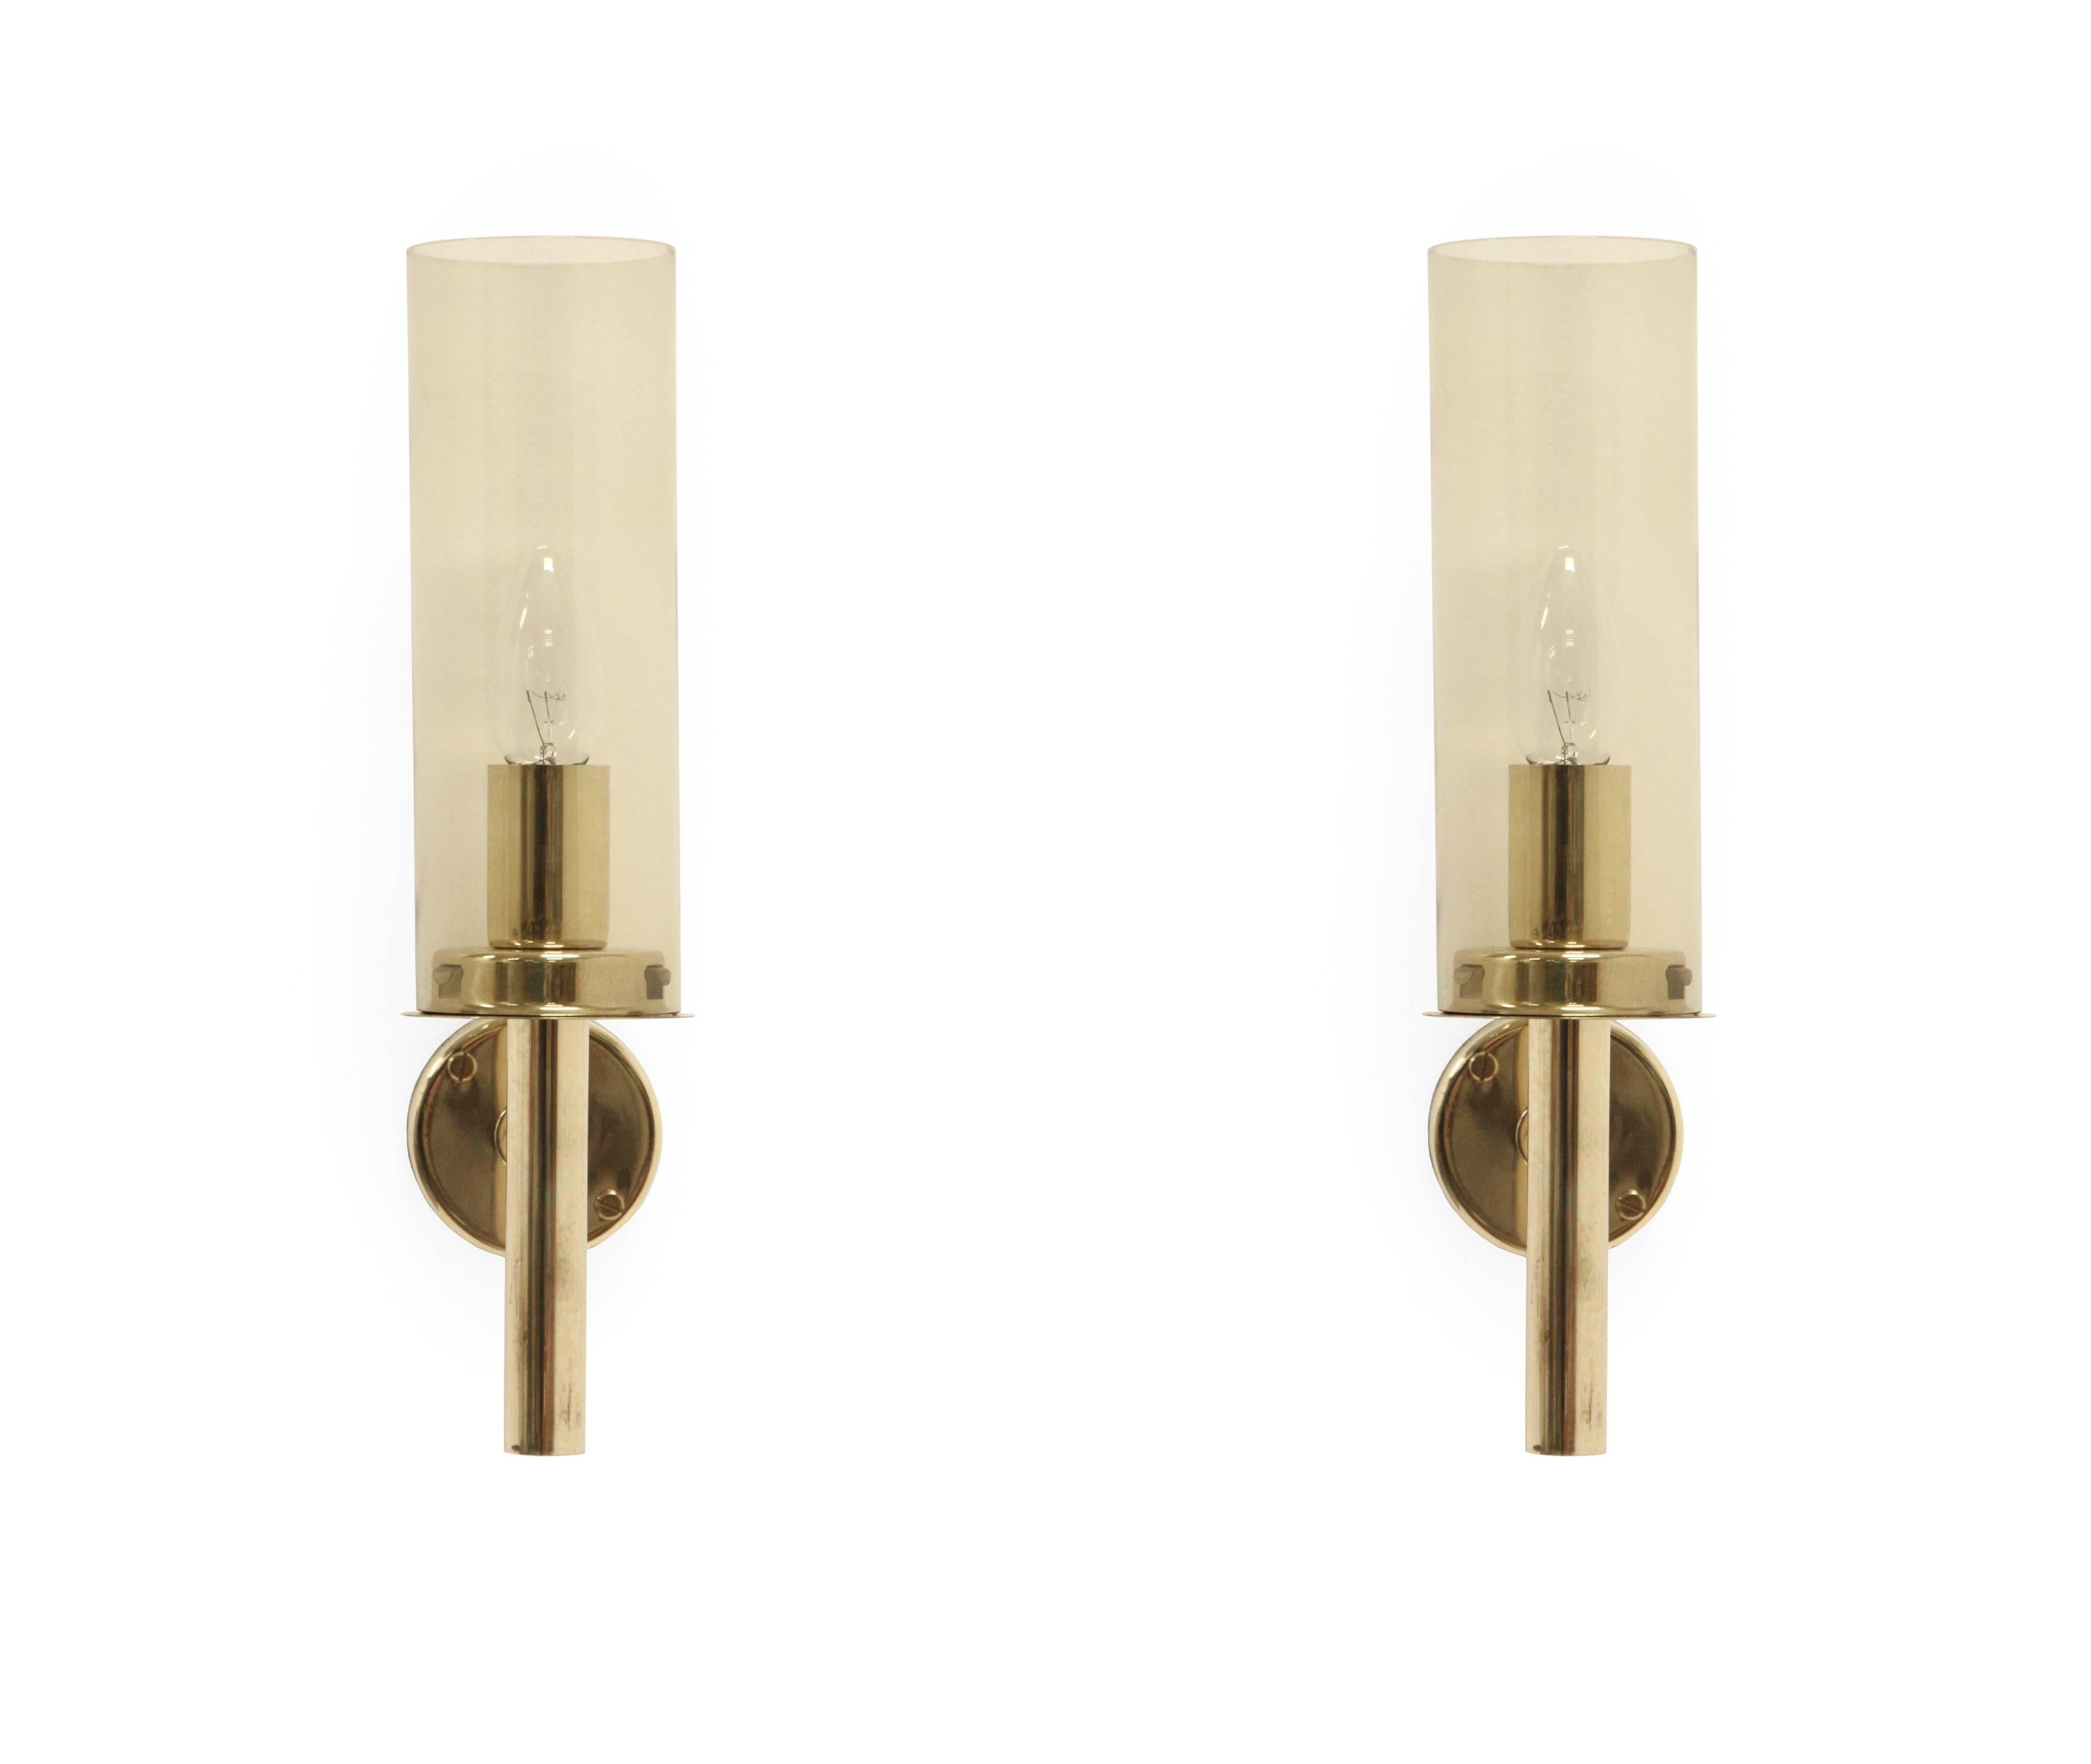 Graceful and modernist wall lamps in brass shades in coloured glass.

Model '169/14'. Designed and made in Sweden by Hans-Agne Jakobsson from circa 1960 second half.

Both lamps are fully working and in good vintage condition with some traces of